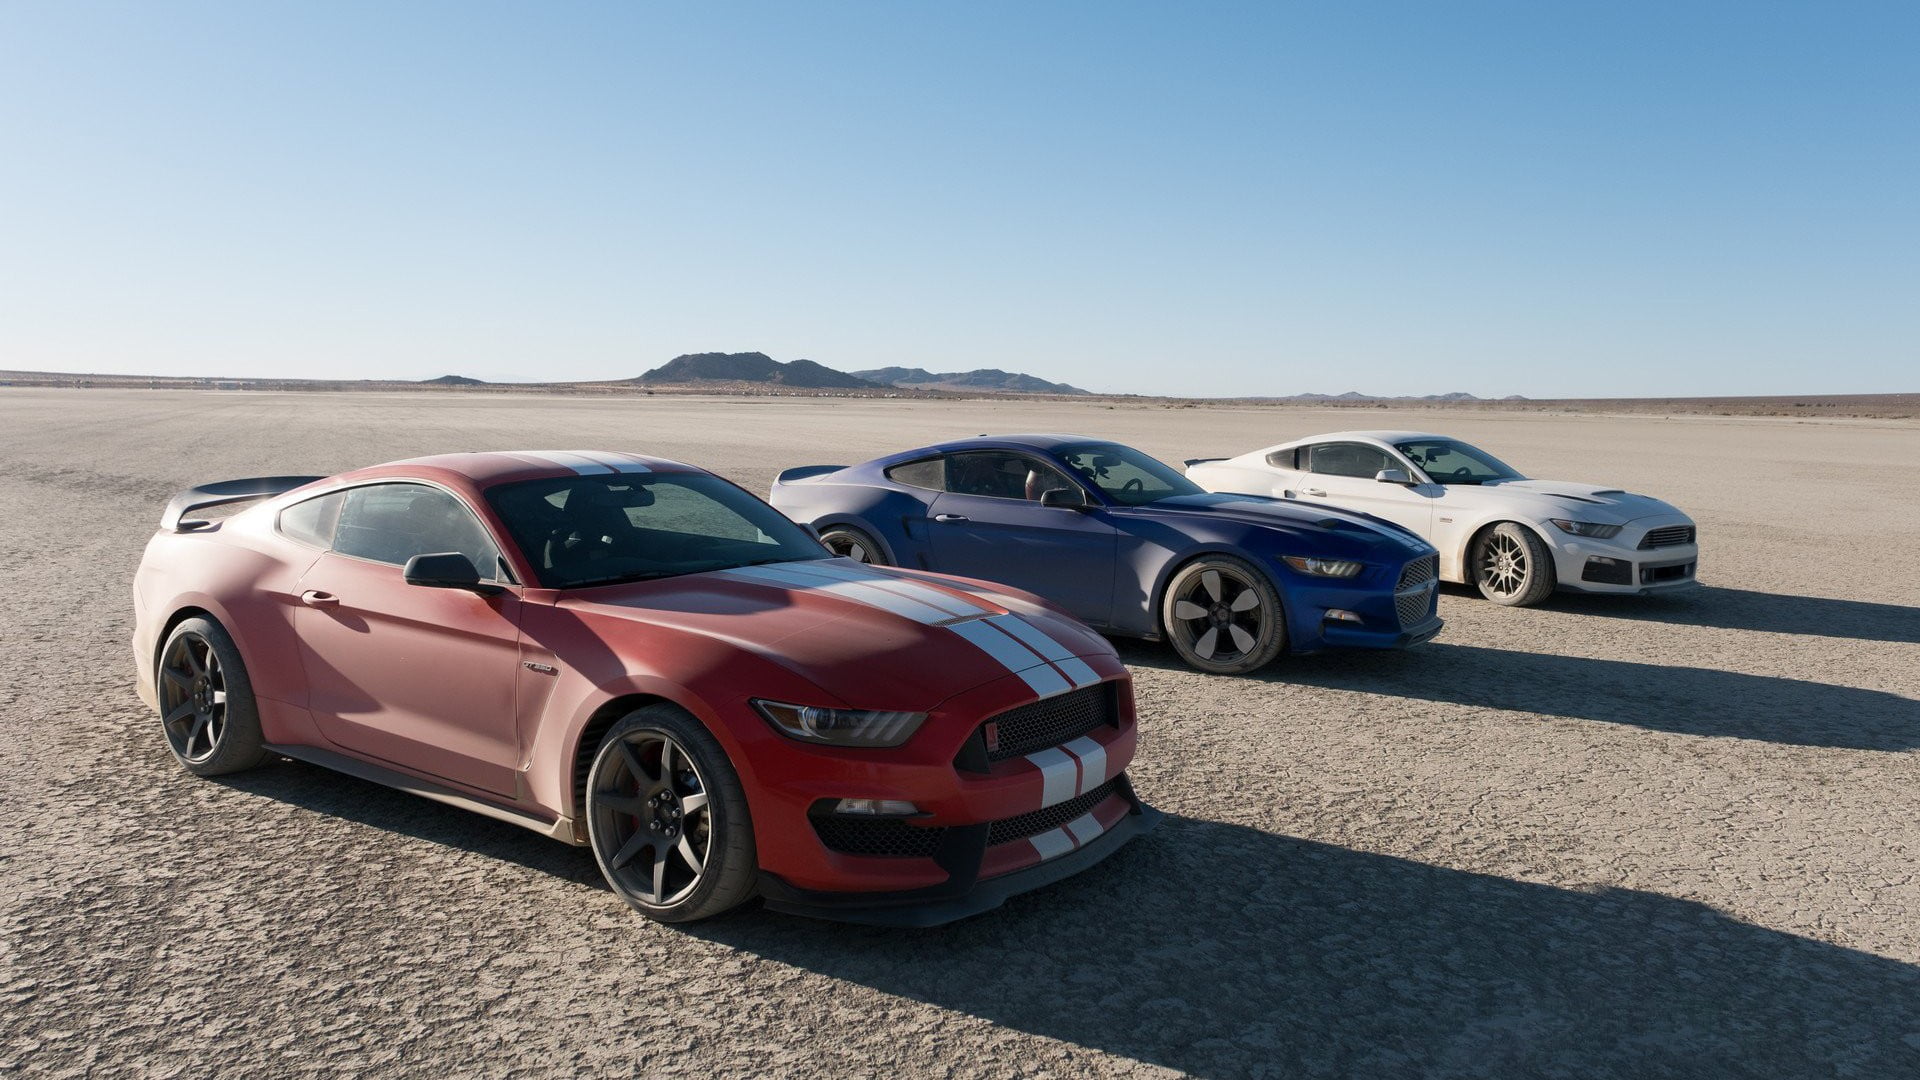 three assorted-color Ford Mustang GT's, car, Ford Mustang, The Grand Tour, gt350r